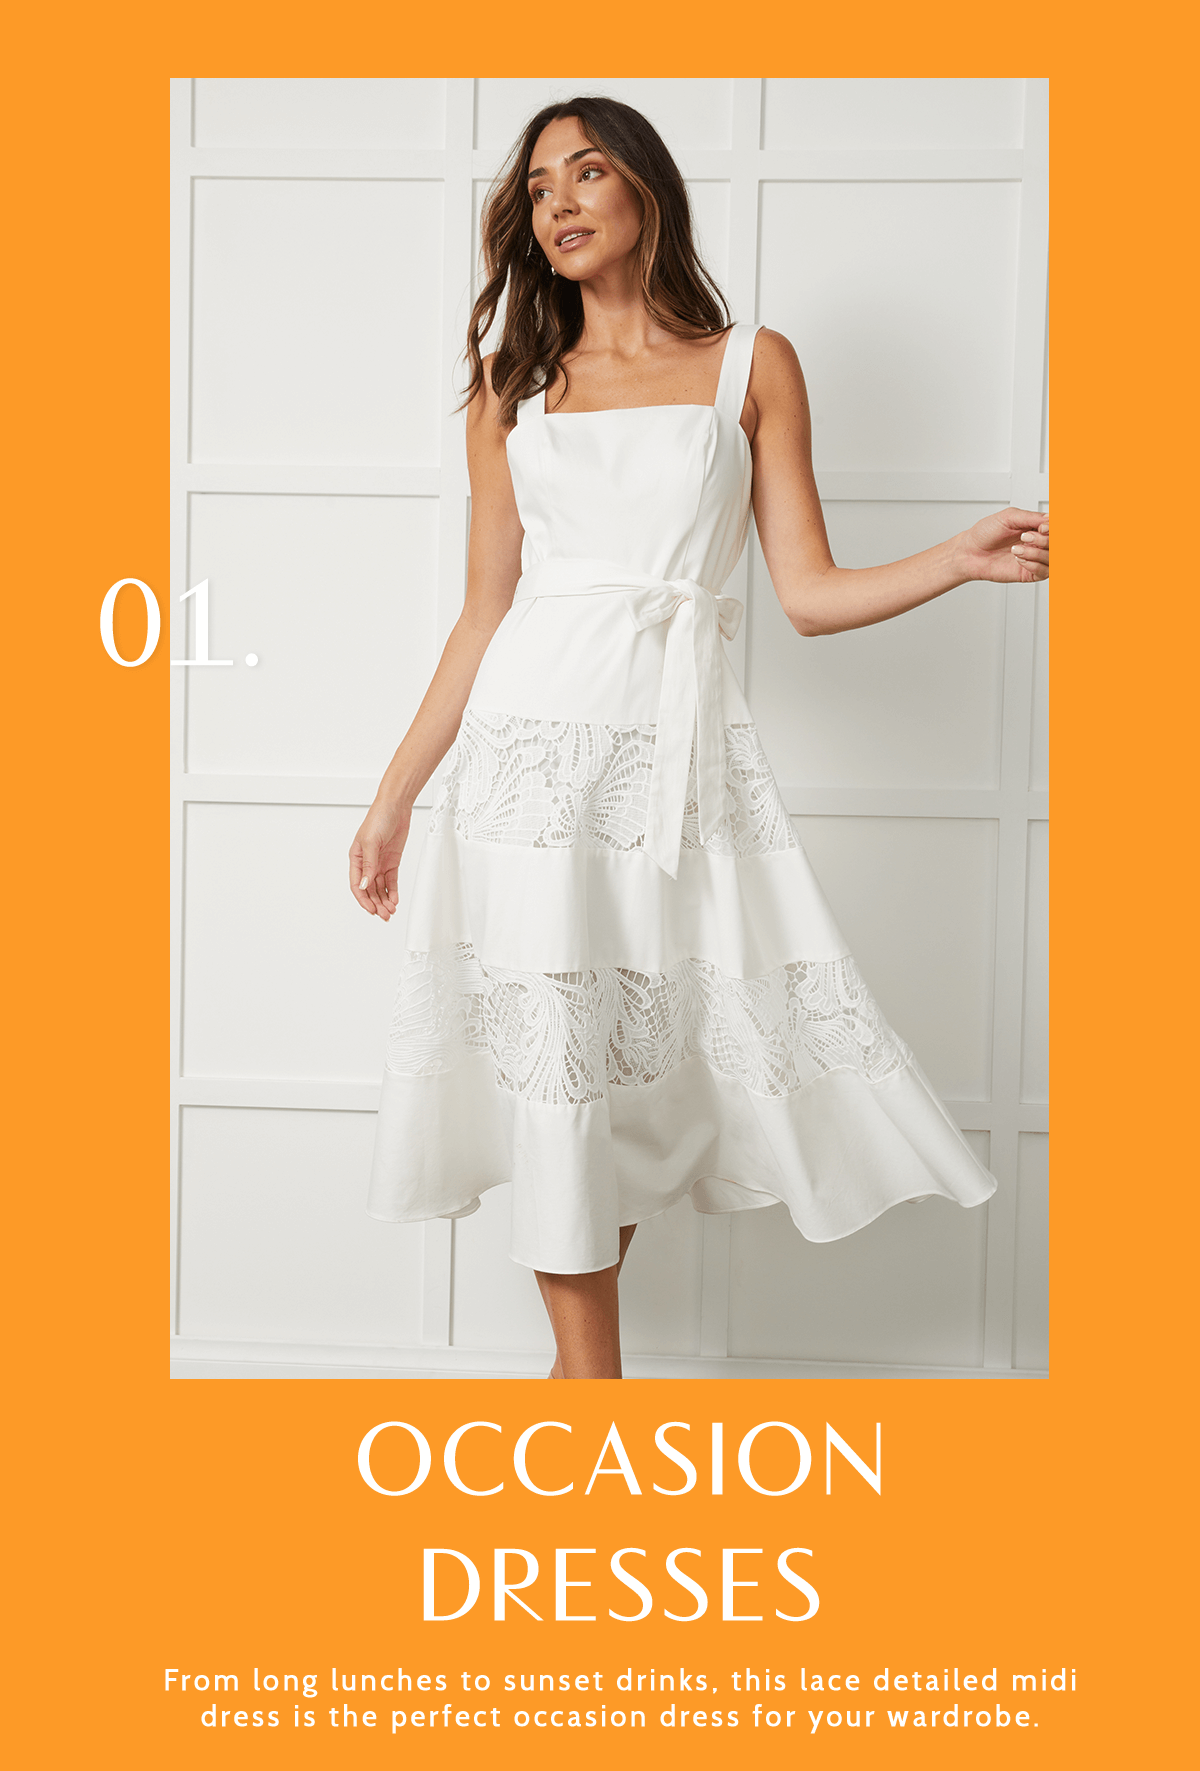 OCCASION DRESSES From long lunches to sunset drinks, this lace detailed midi dress is the perfect occasion dress for your wardrobe. 